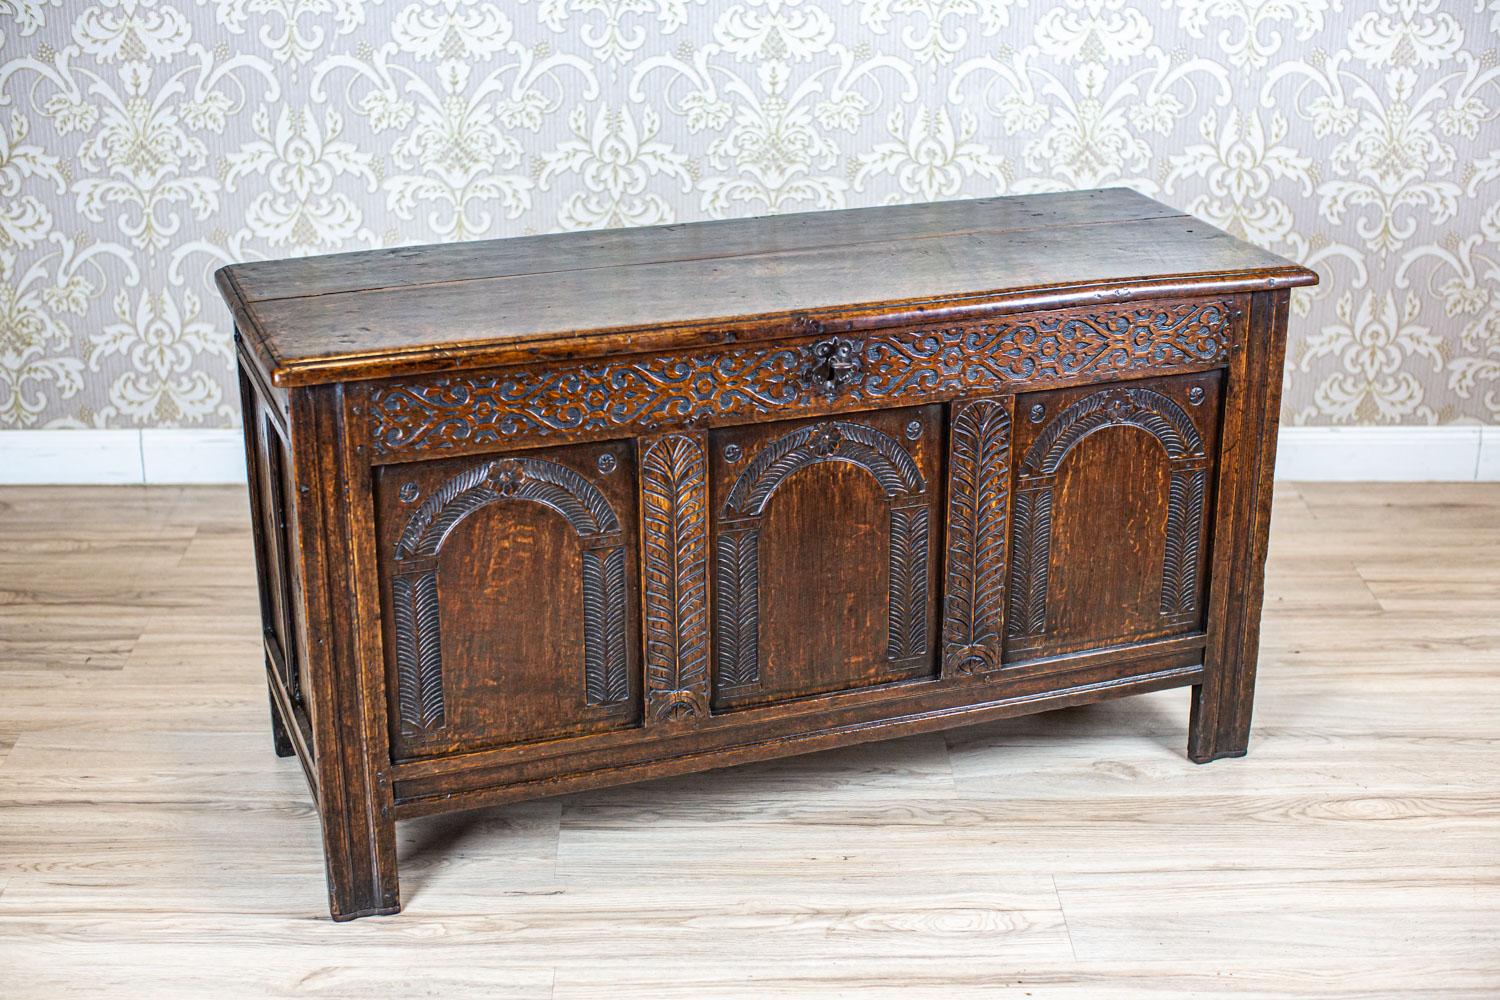 19th-Century Oak Cassone in Carved Floral Patterns

We present you this cassone from the 2nd half of the 19th century made of solid oak wood.
The panels on the front and the sides are divided and decorated with floral carved patterns.
The chest is